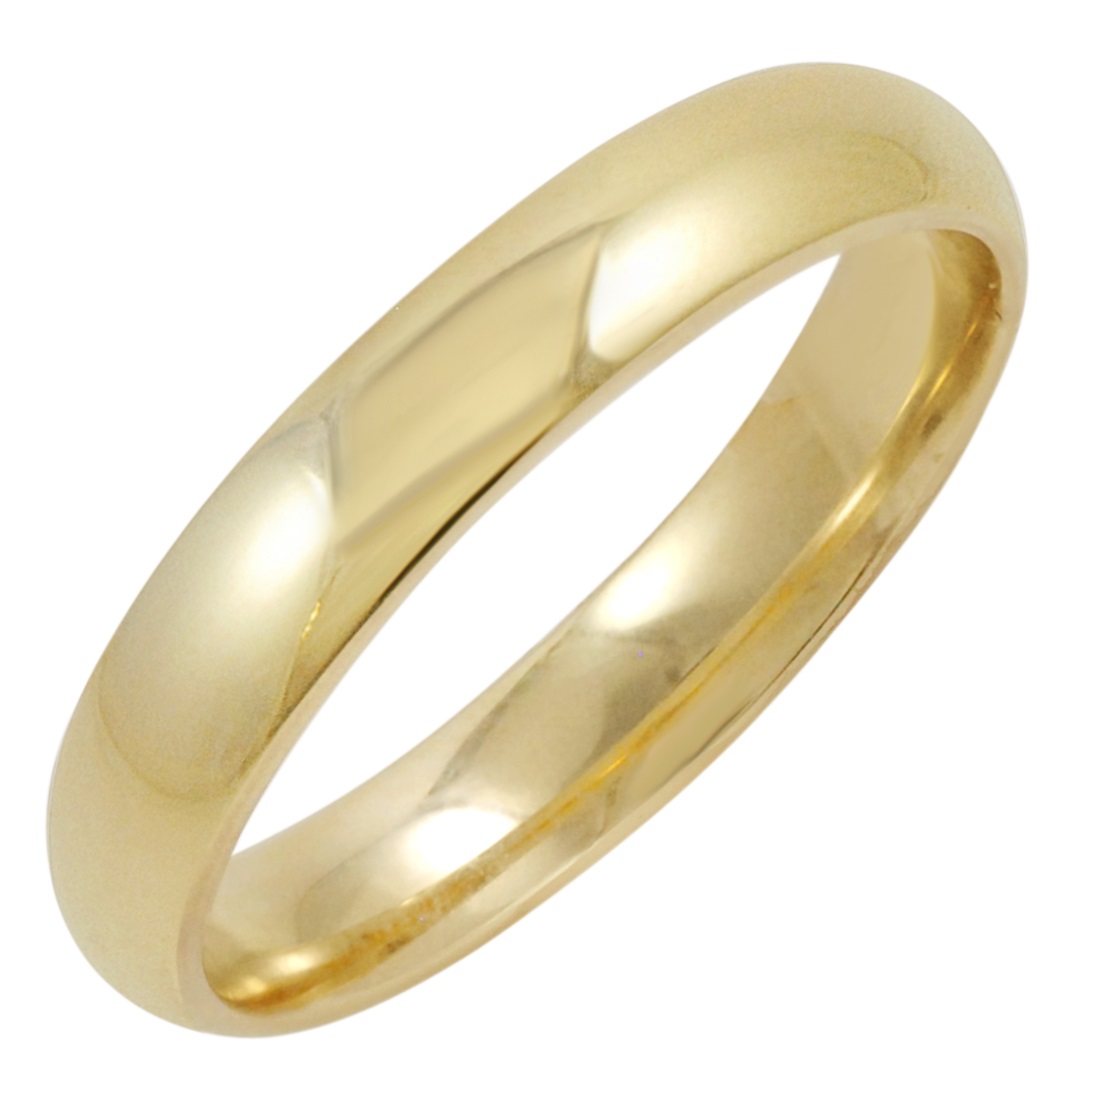 4mm Mens 10k Yellow Gold Comfort Fit Plain Wedding Band - Size 10